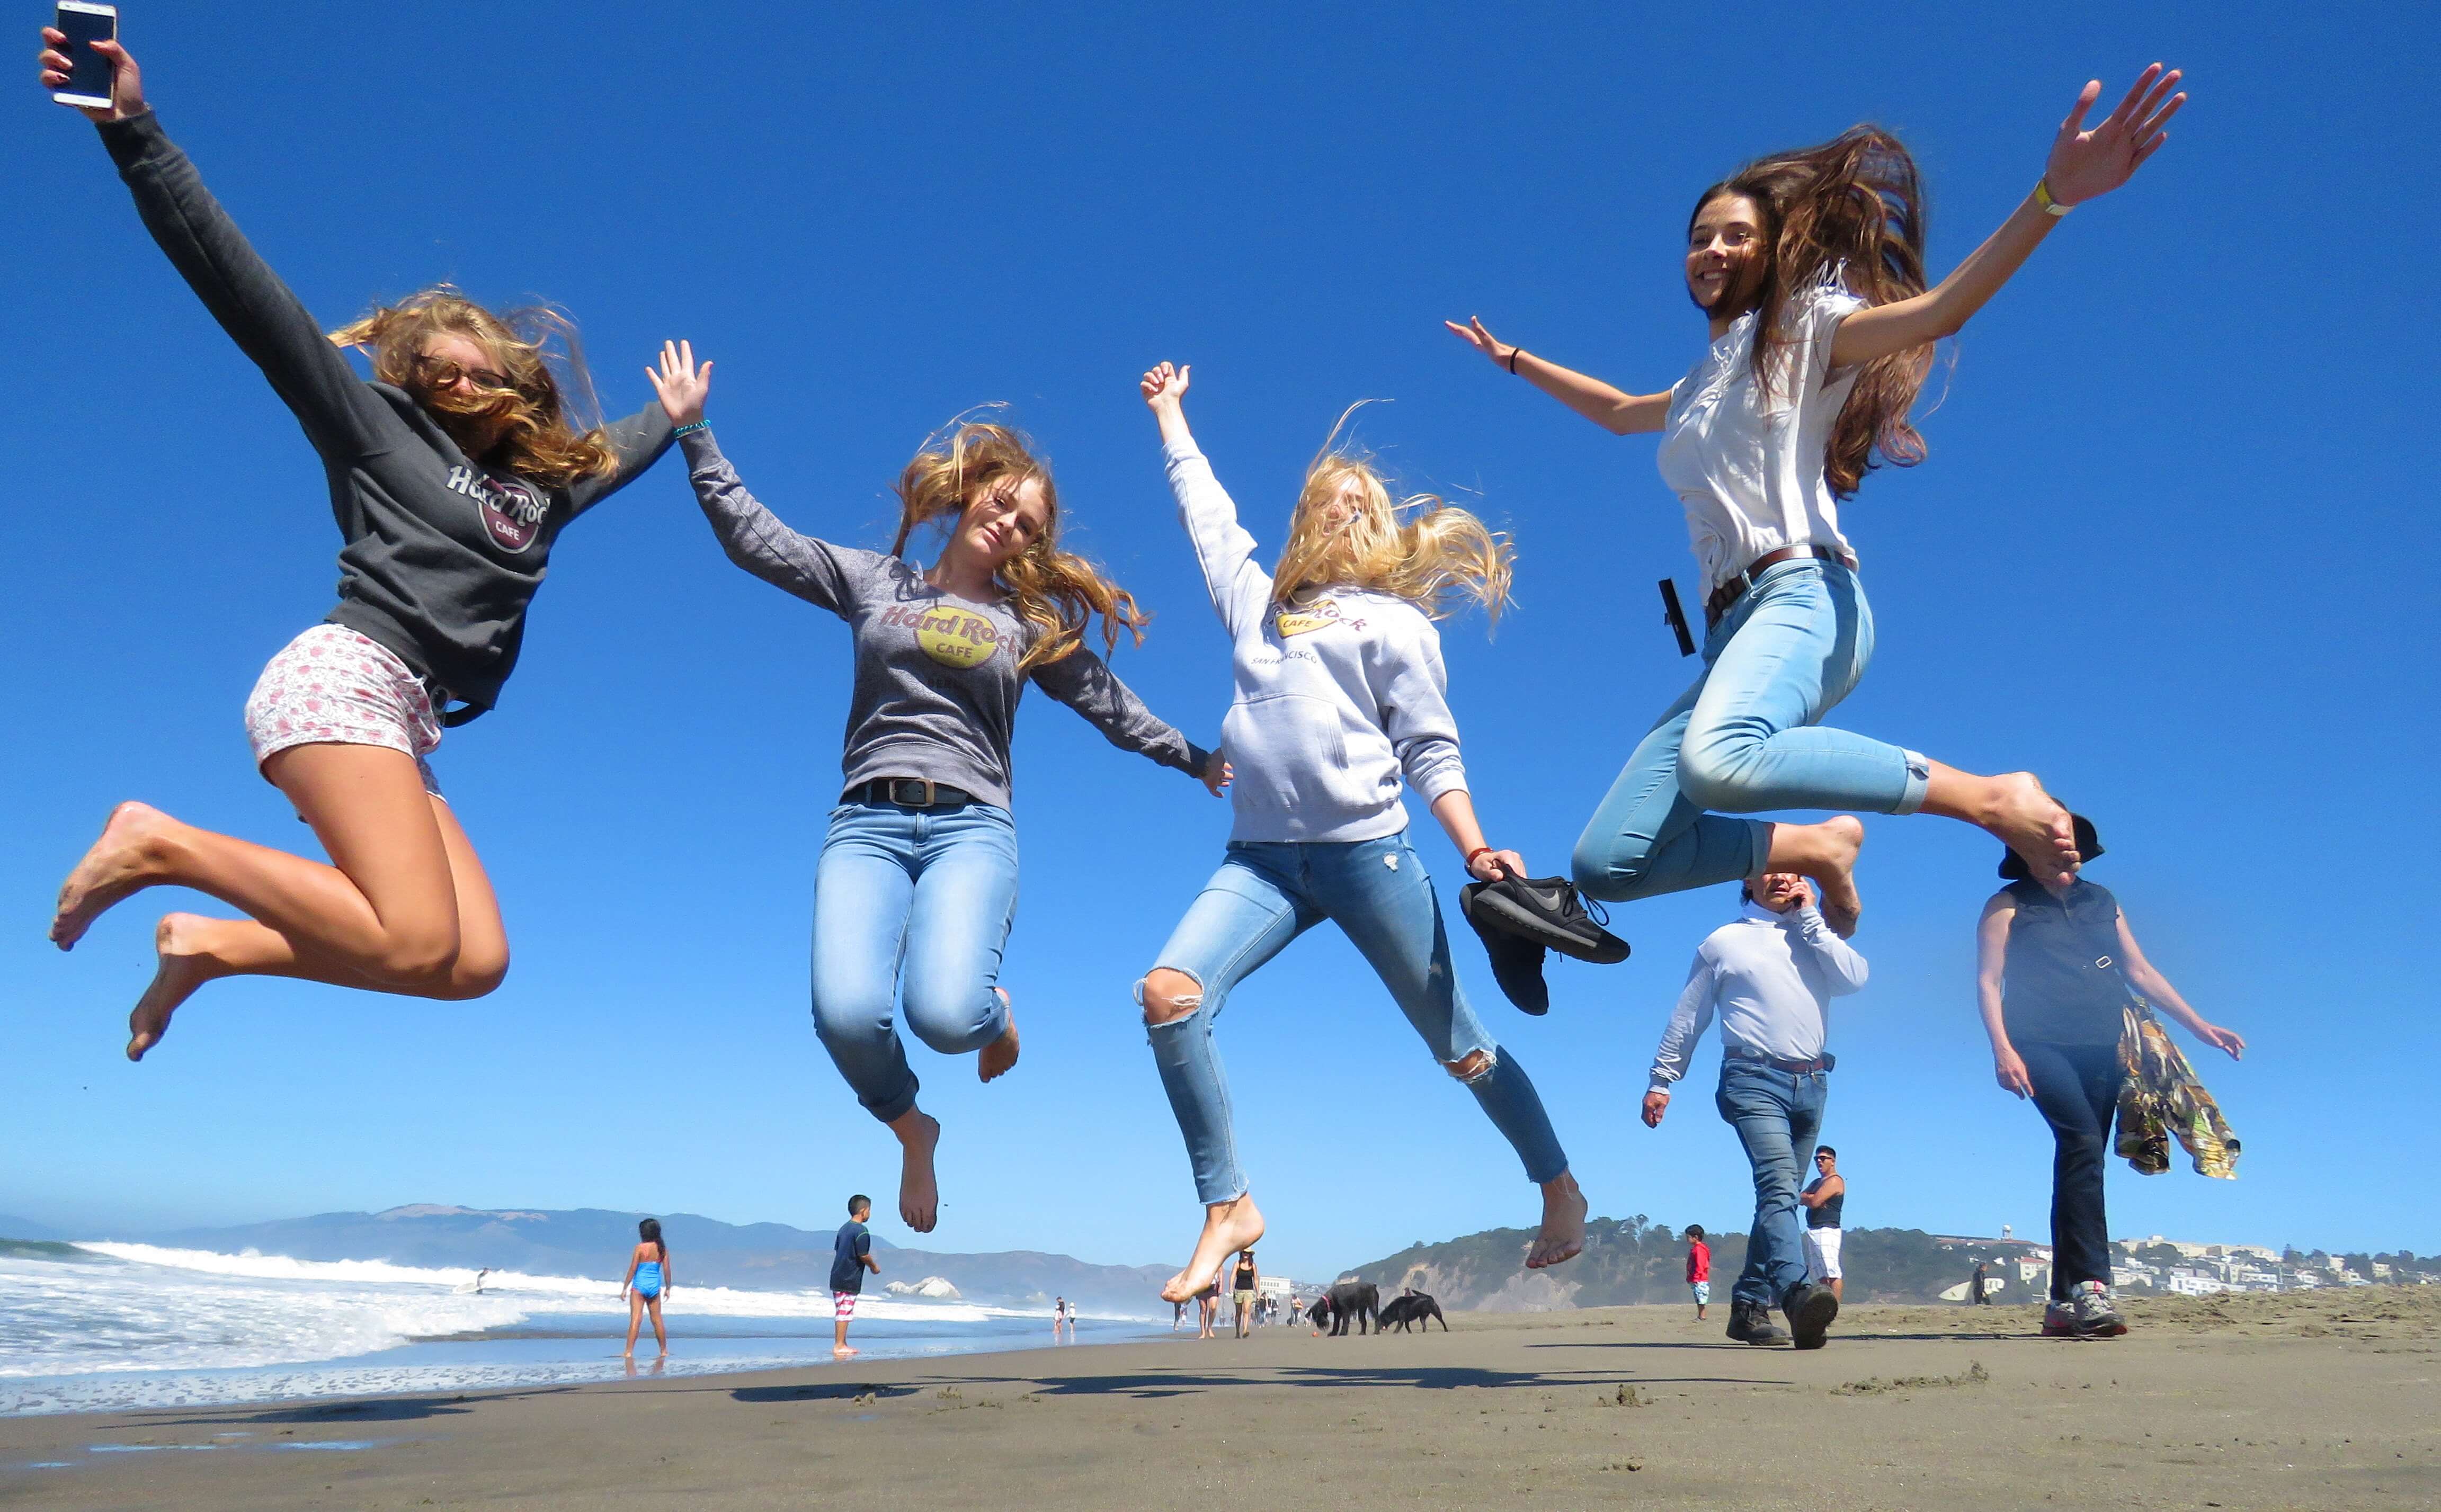 fun_cool_things_to_do_in_san_francisco_beach_activities